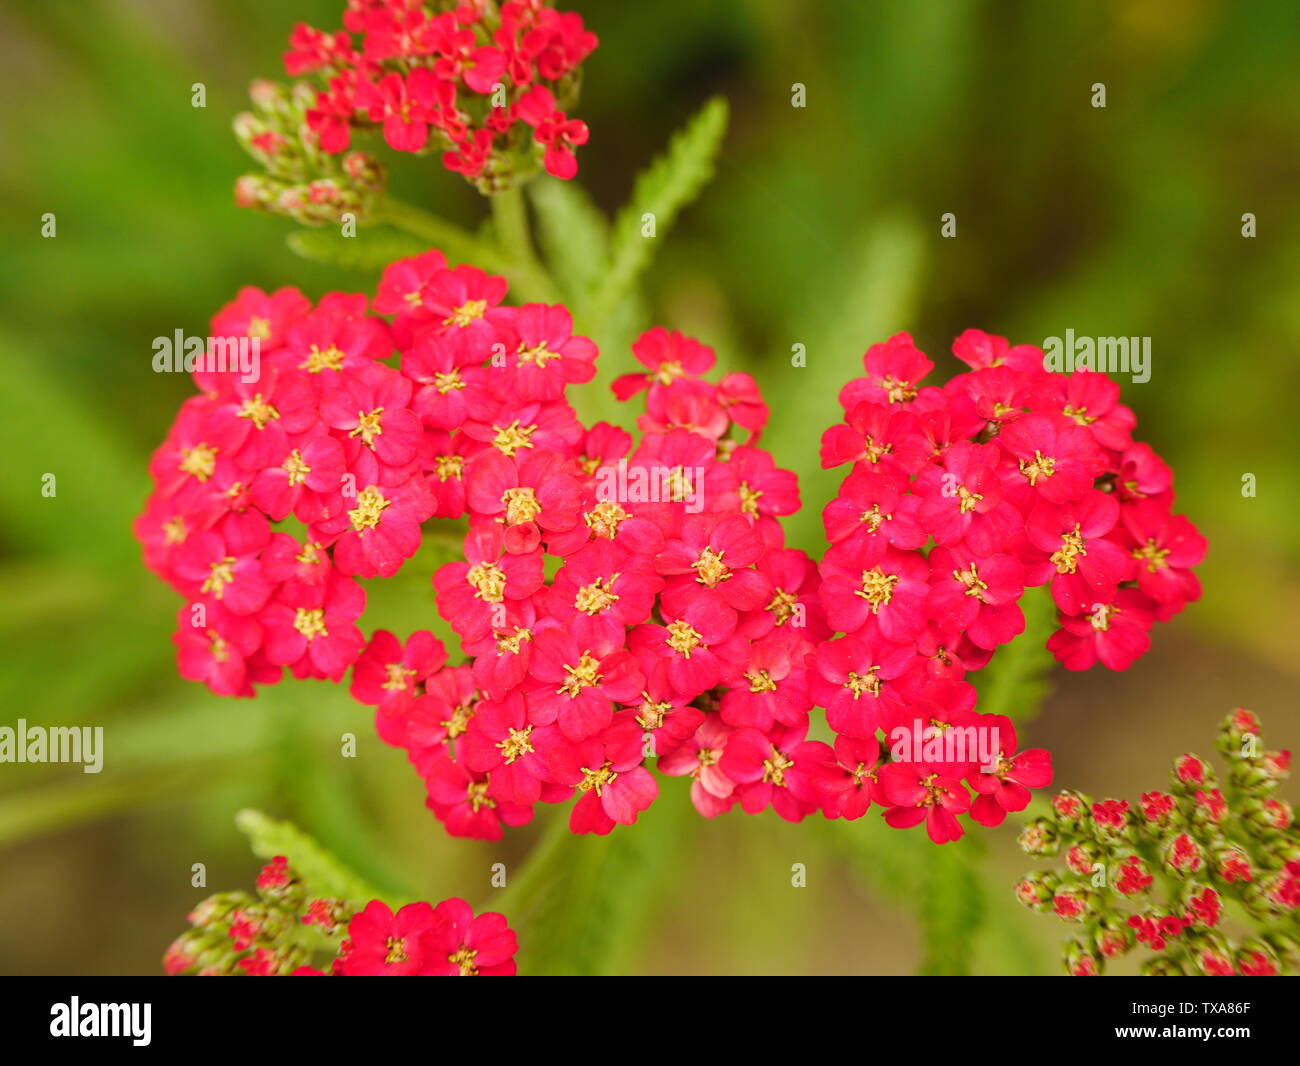 Close up of cluster of bright red tiny achillea flowers with yellow centres Stock Photo